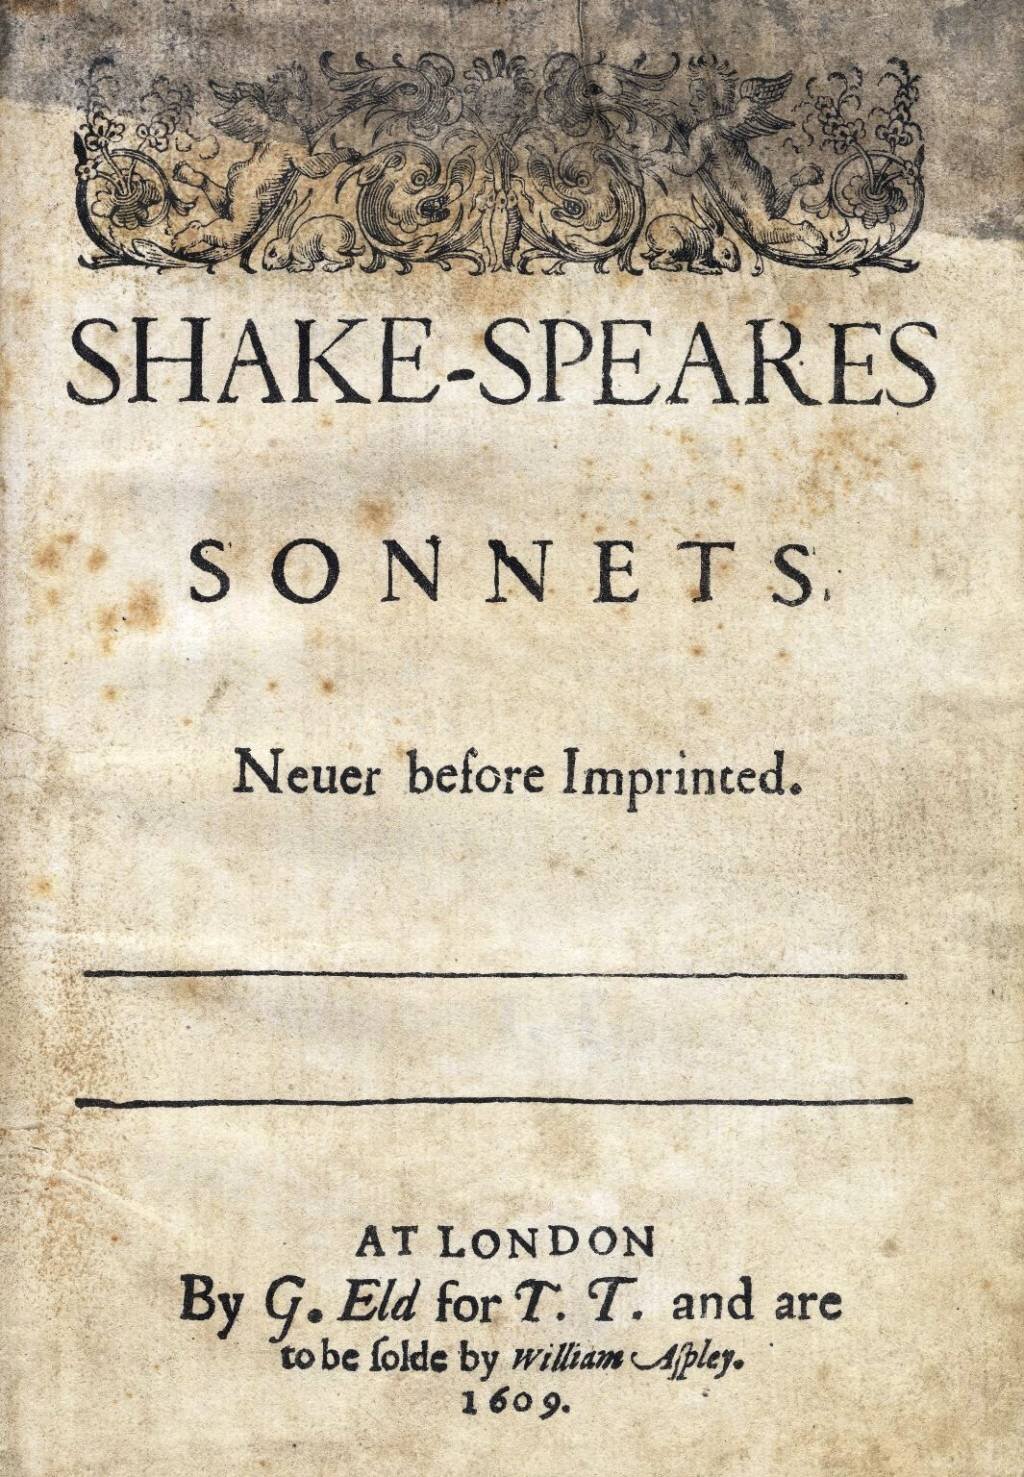 short essay on the themes of shakespeare's sonnets